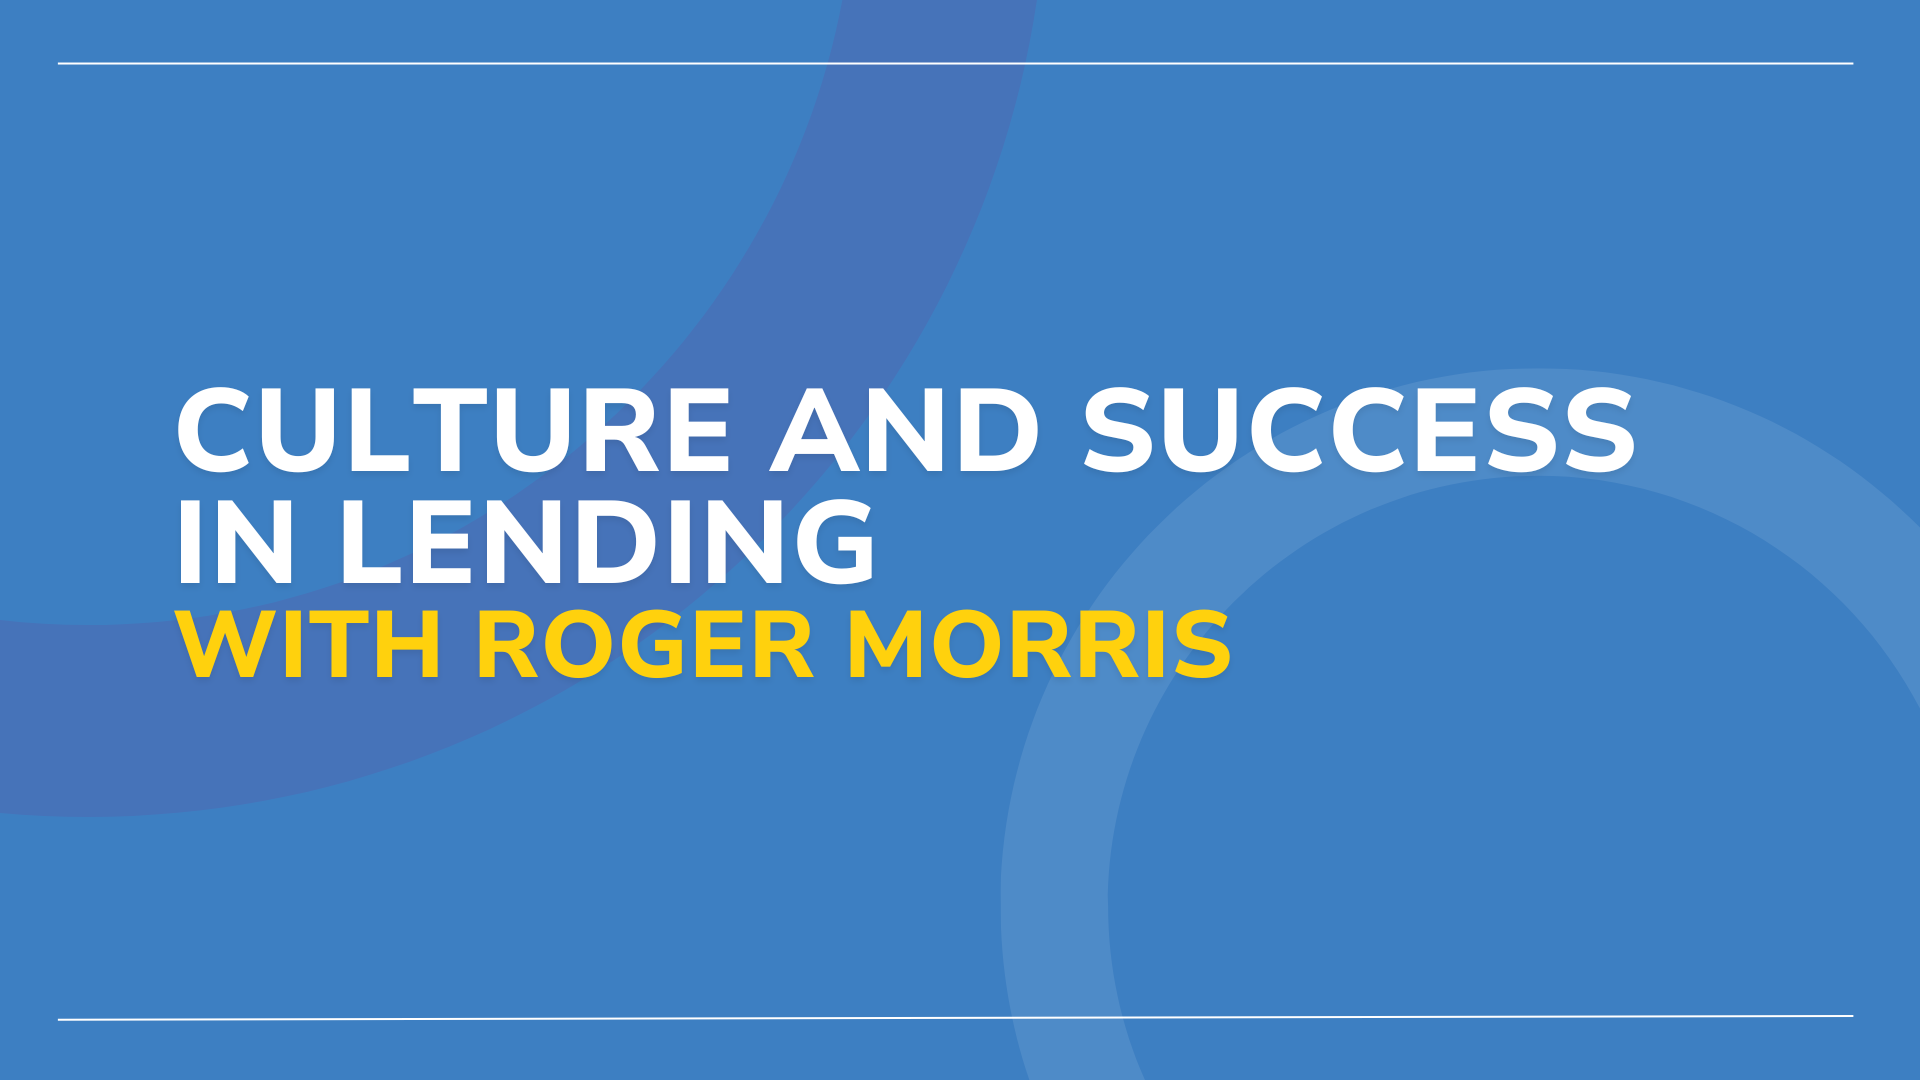 Culture and Success in Lending with Roger Morris